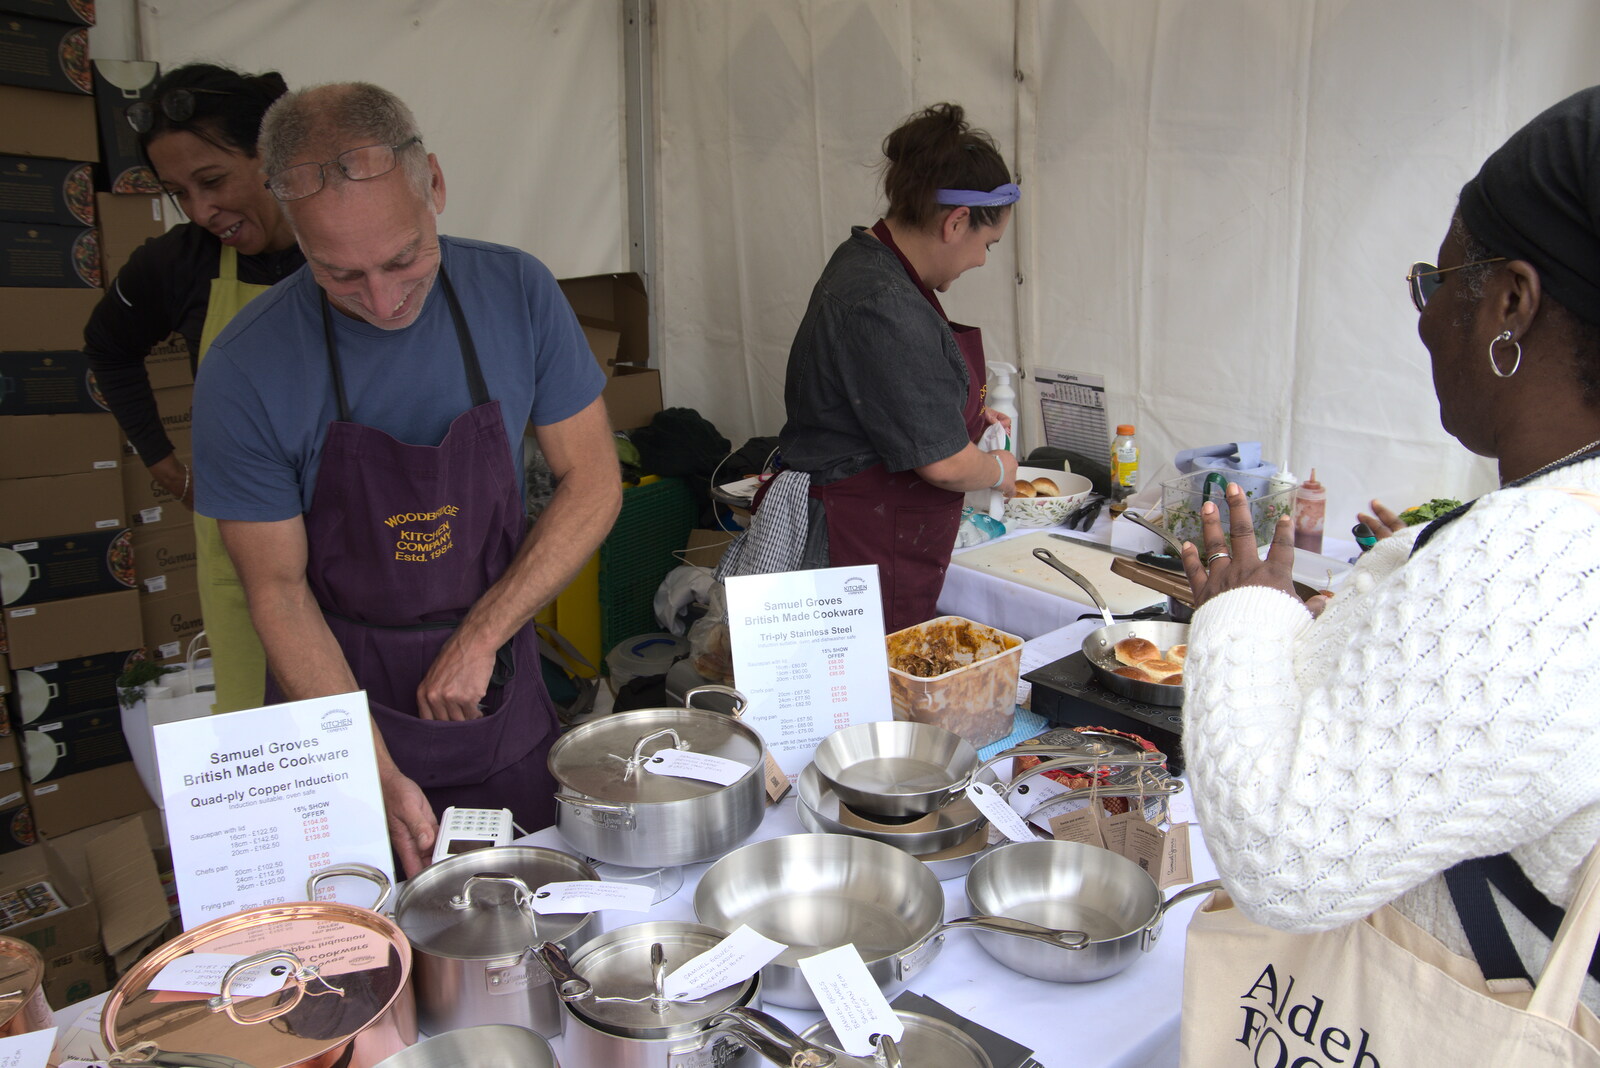 The dudes from Woodbridge kitchen shop are there from The Aldeburgh Food Festival, Snape Maltings, Suffolk - 25th September 2022